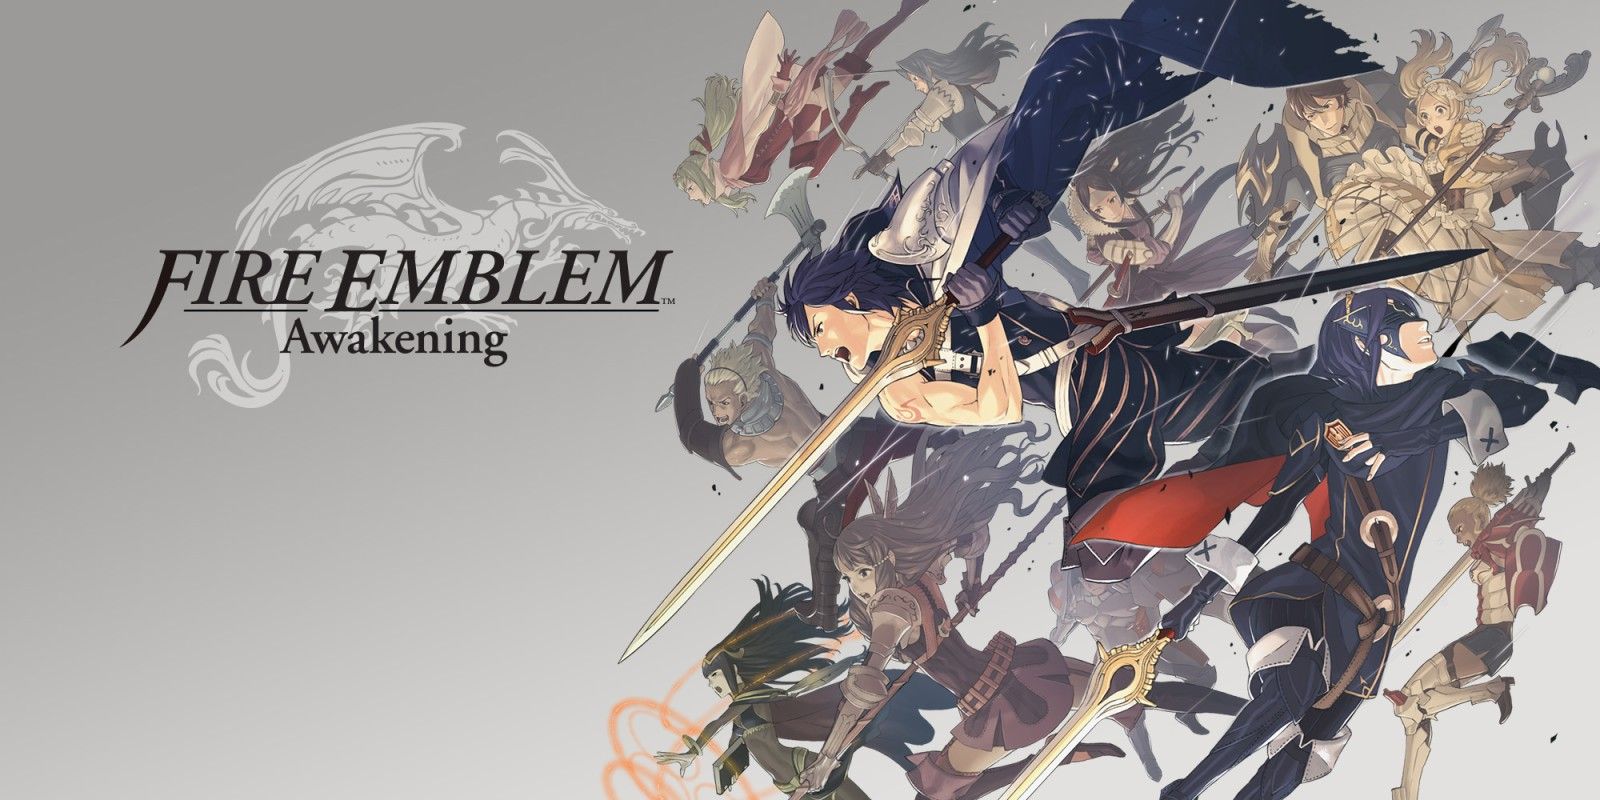 The Title screen of Fire Emblem Awakening with all the characters